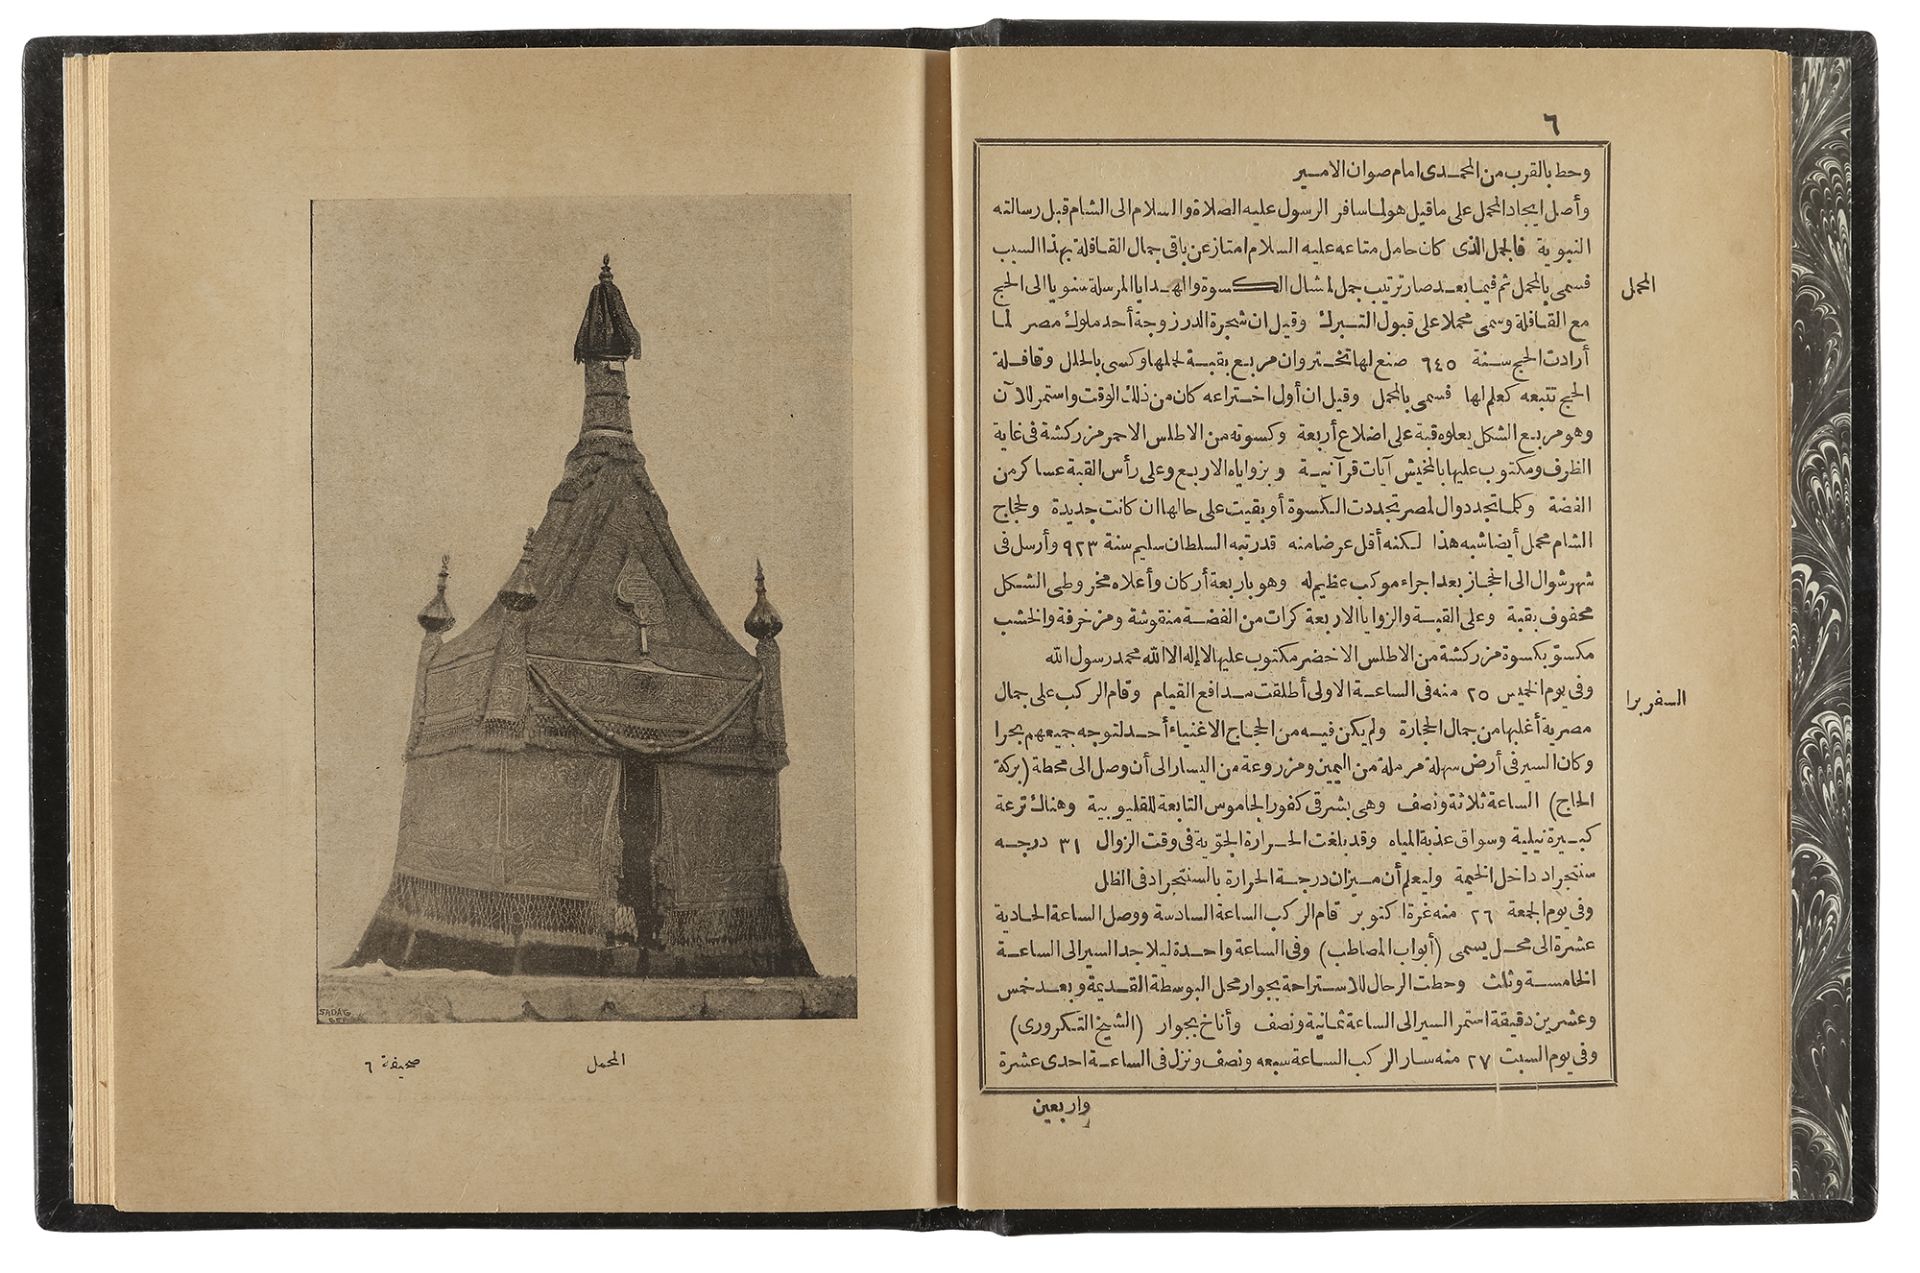 HAJJ GUIDE FOR PILGRIMS GOING TO MECCA AND MEDINA AND A BOOK BY MR. MOHAMMED PASHA SADIQ DATED 1313